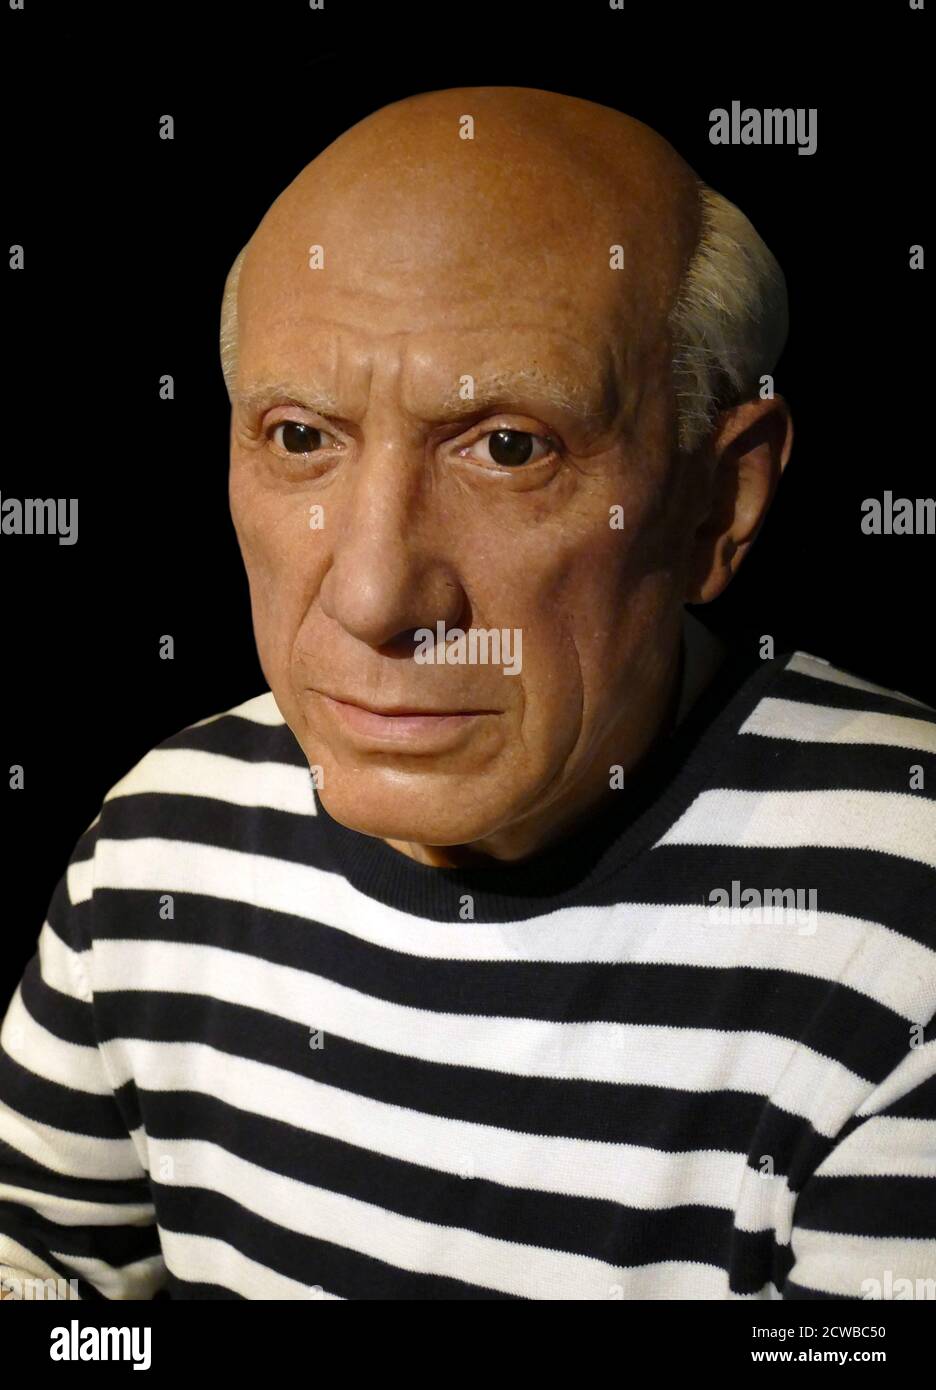 Waxwork statue depicting Pablo Picasso, (1881 - 1973); Spanish painter, regarded as one of the most influential artists of the 20th century, he is known for co-founding the Cubist movement, Stock Photo